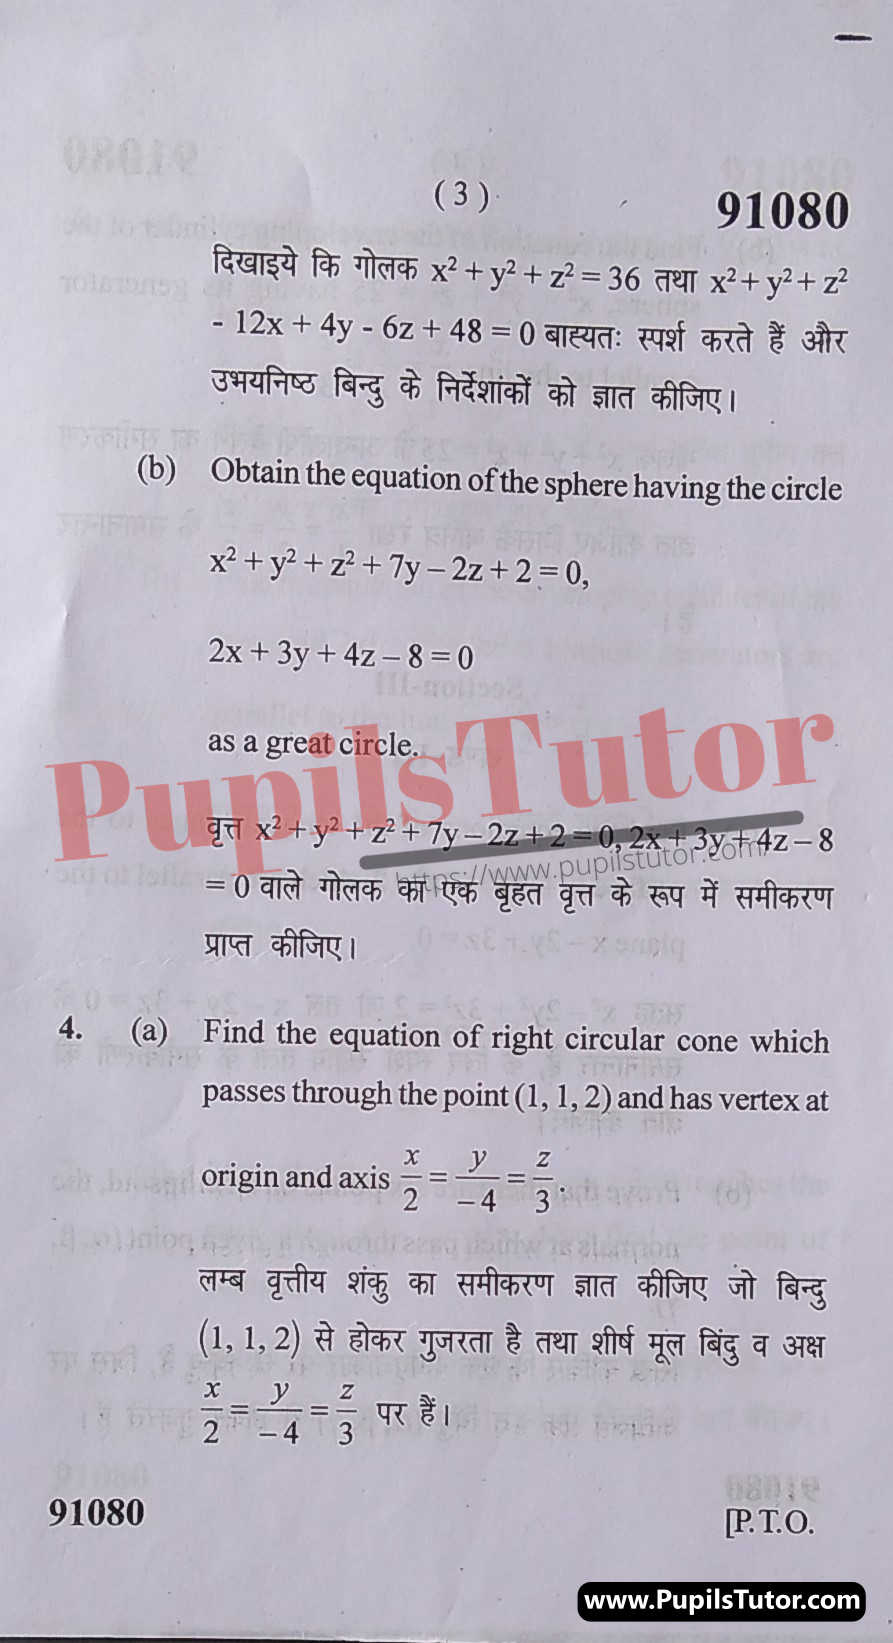 Free Download PDF Of M.D. University B.Sc. [Maths] First Semester Latest Question Paper For Solid Geometry Subject (Page 3) - https://www.pupilstutor.com